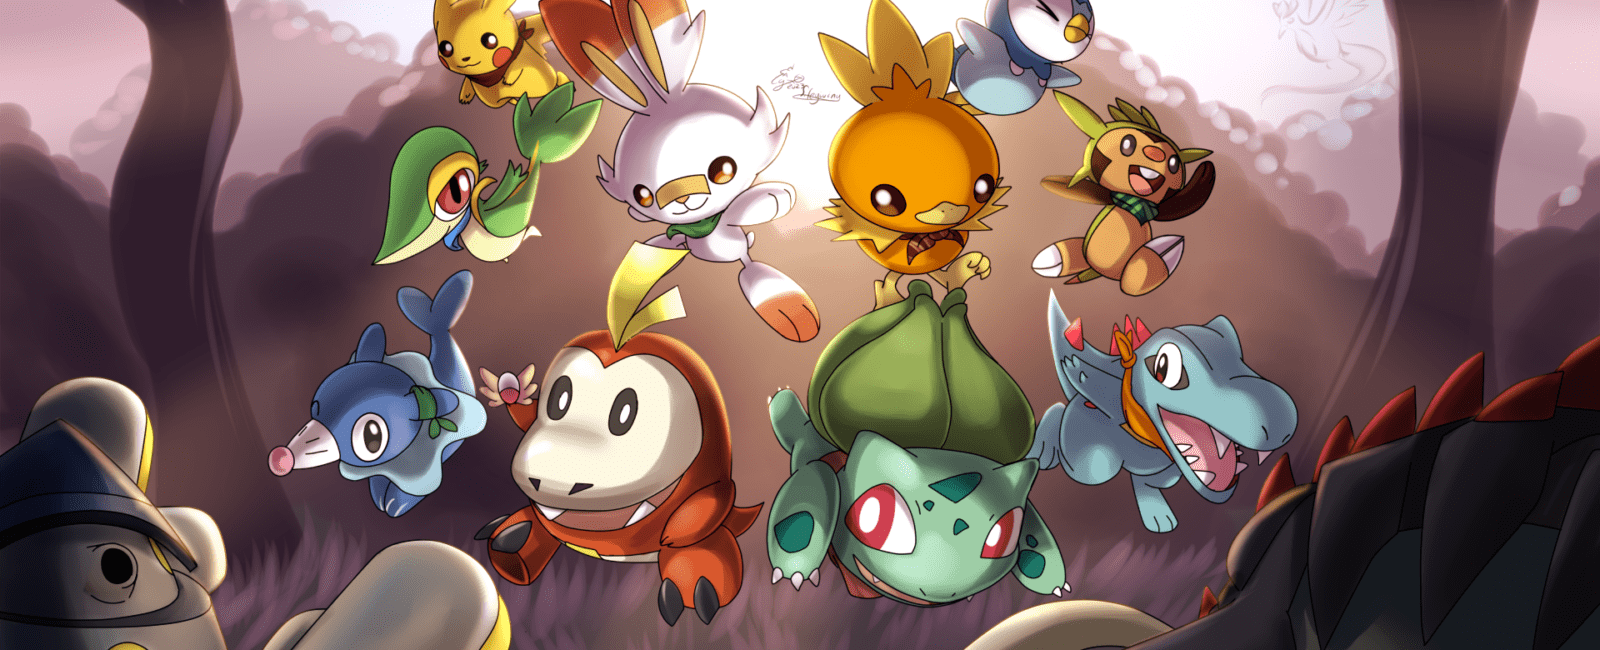 Pokemon_Mystery_dungeon_special_fanmade_fanart_Fuecoco_Bulbasaur_Pikachu_Totodile_Popplio_Chespin_Torchic_Scorbunny_Snivy_Piplup_Pikachu_Iron Hands_ Great Tusk